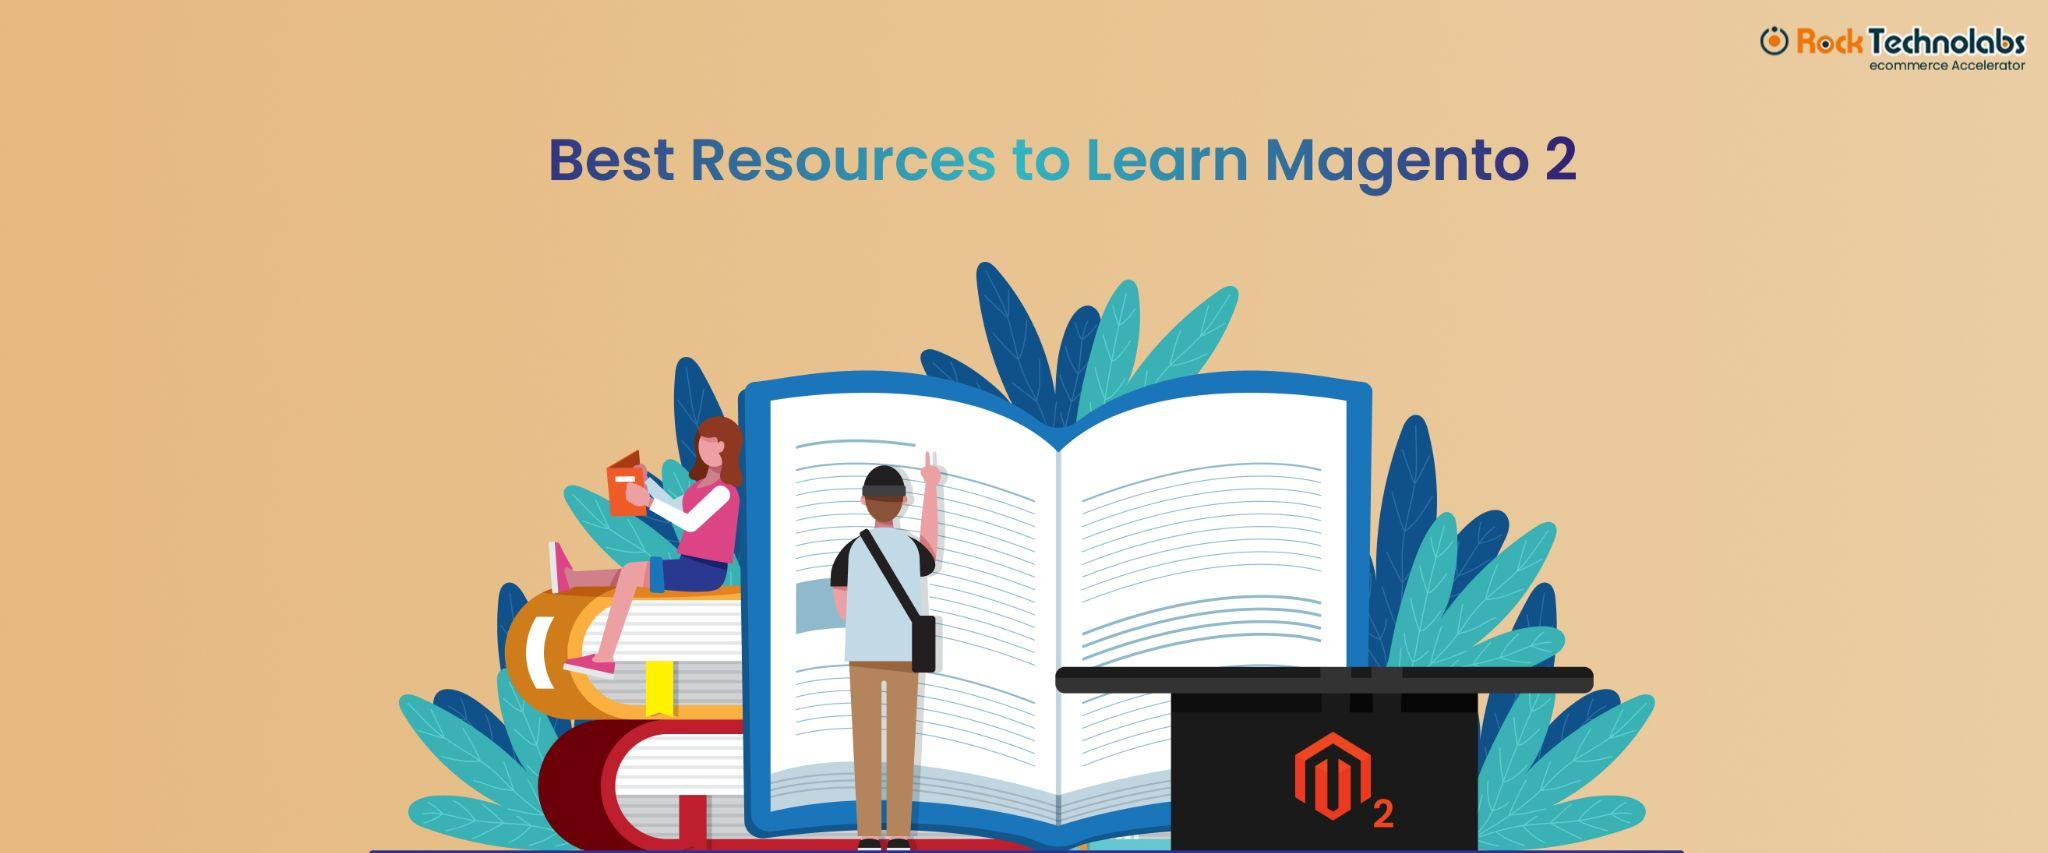 Must Explore Resources to Learn Magento 2